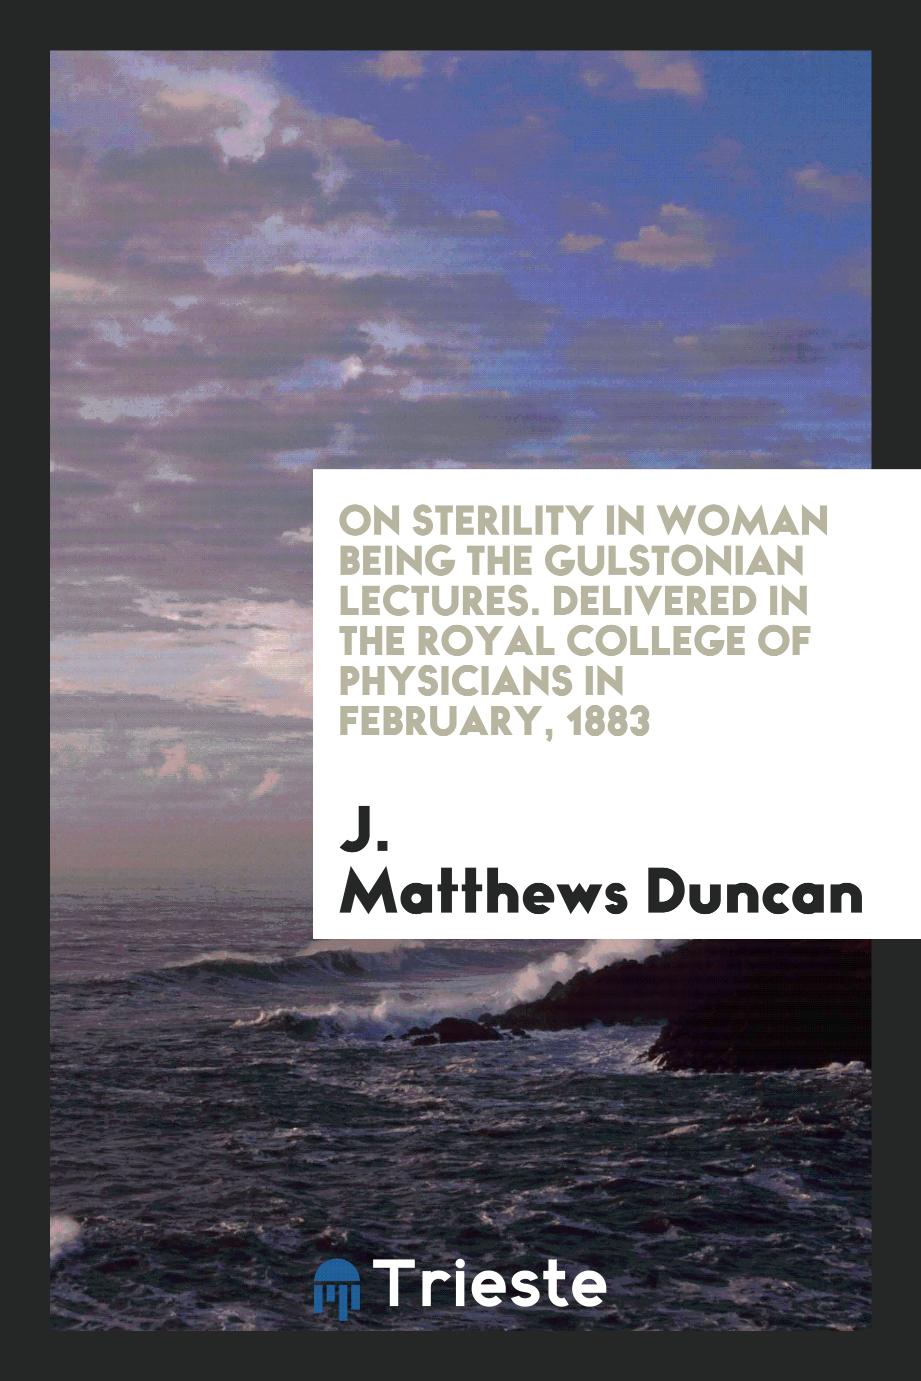 On Sterility in Woman Being the Gulstonian Lectures. Delivered in the Royal College of Physicians in February, 1883